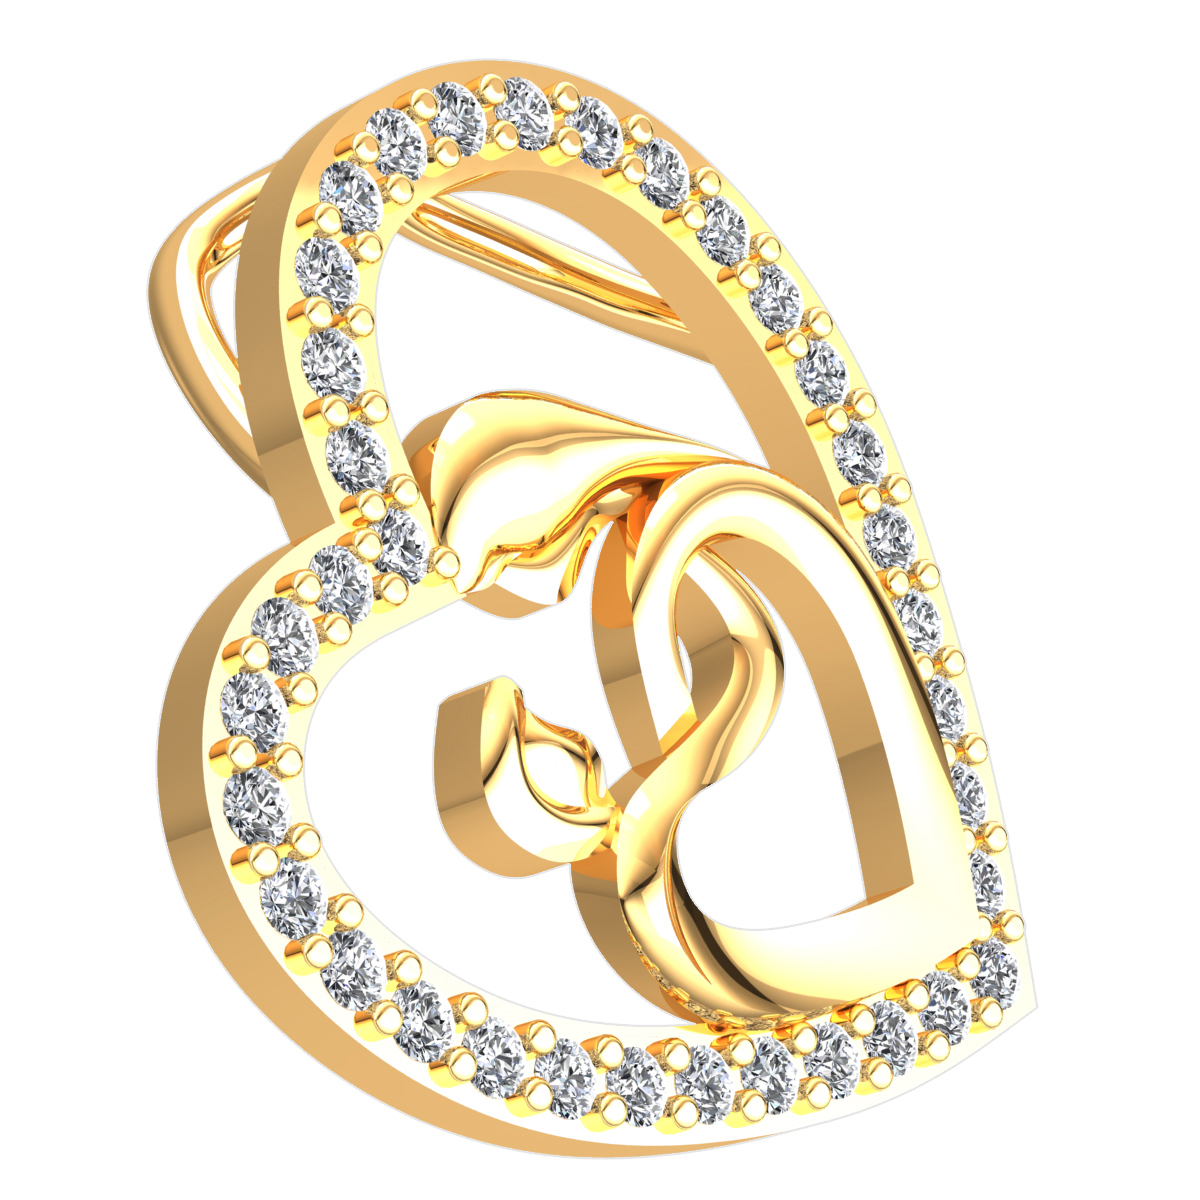 Jewel We Sell 0.2ctw Round Cut Diamond Ladies Heart Mother's Day Pendant Solid 14k White, Yellow or Rose Gold GH I1